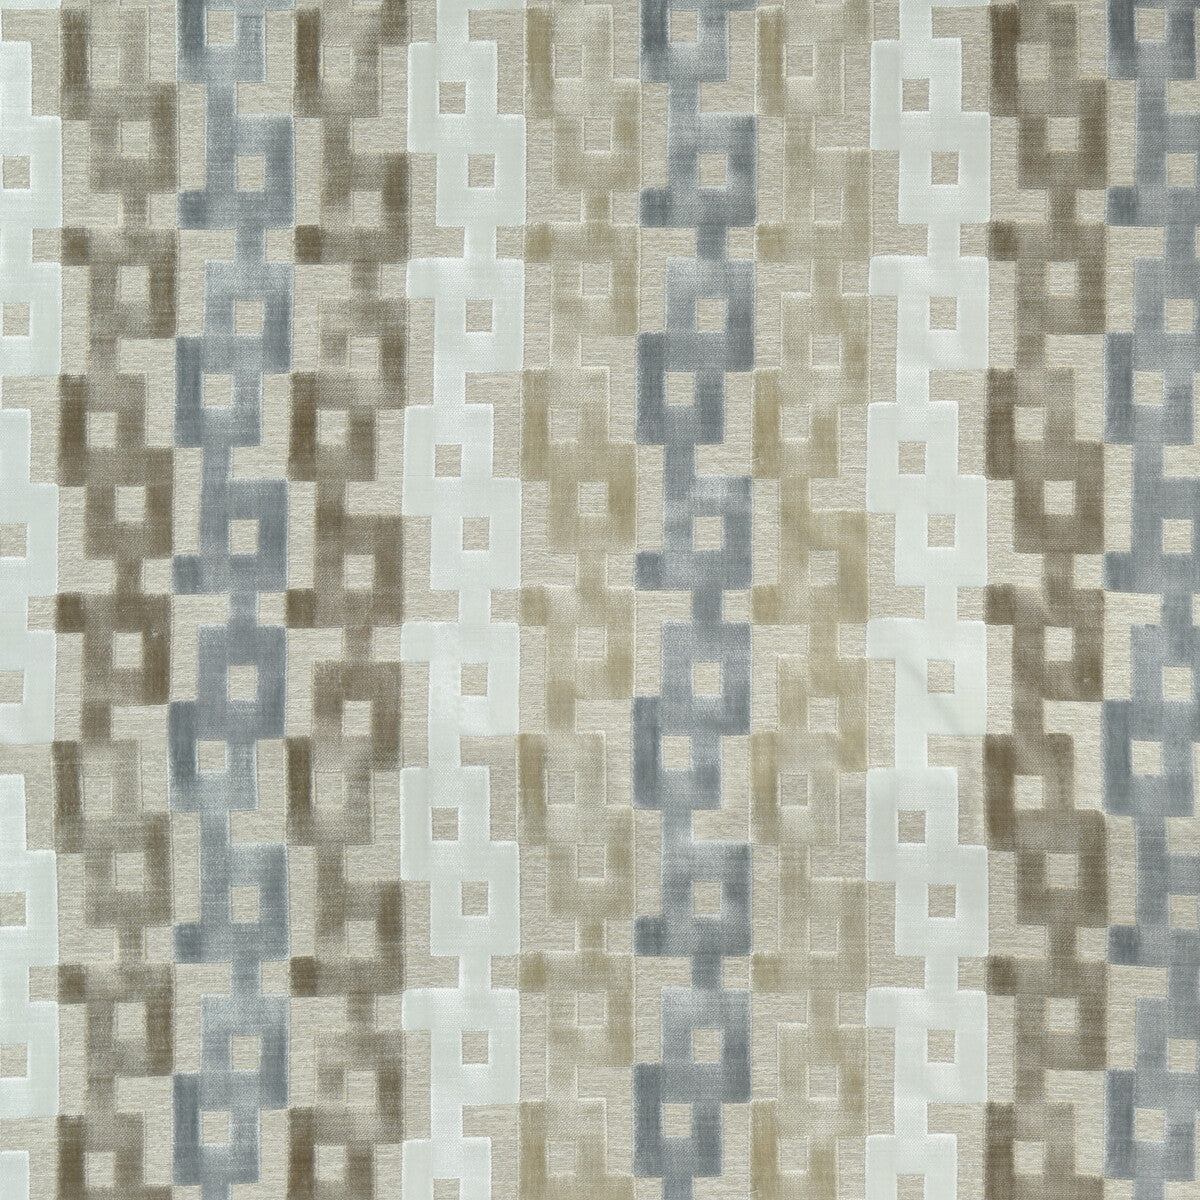 Chain Velvet fabric in natural color - pattern 35856.1611.0 - by Kravet Couture